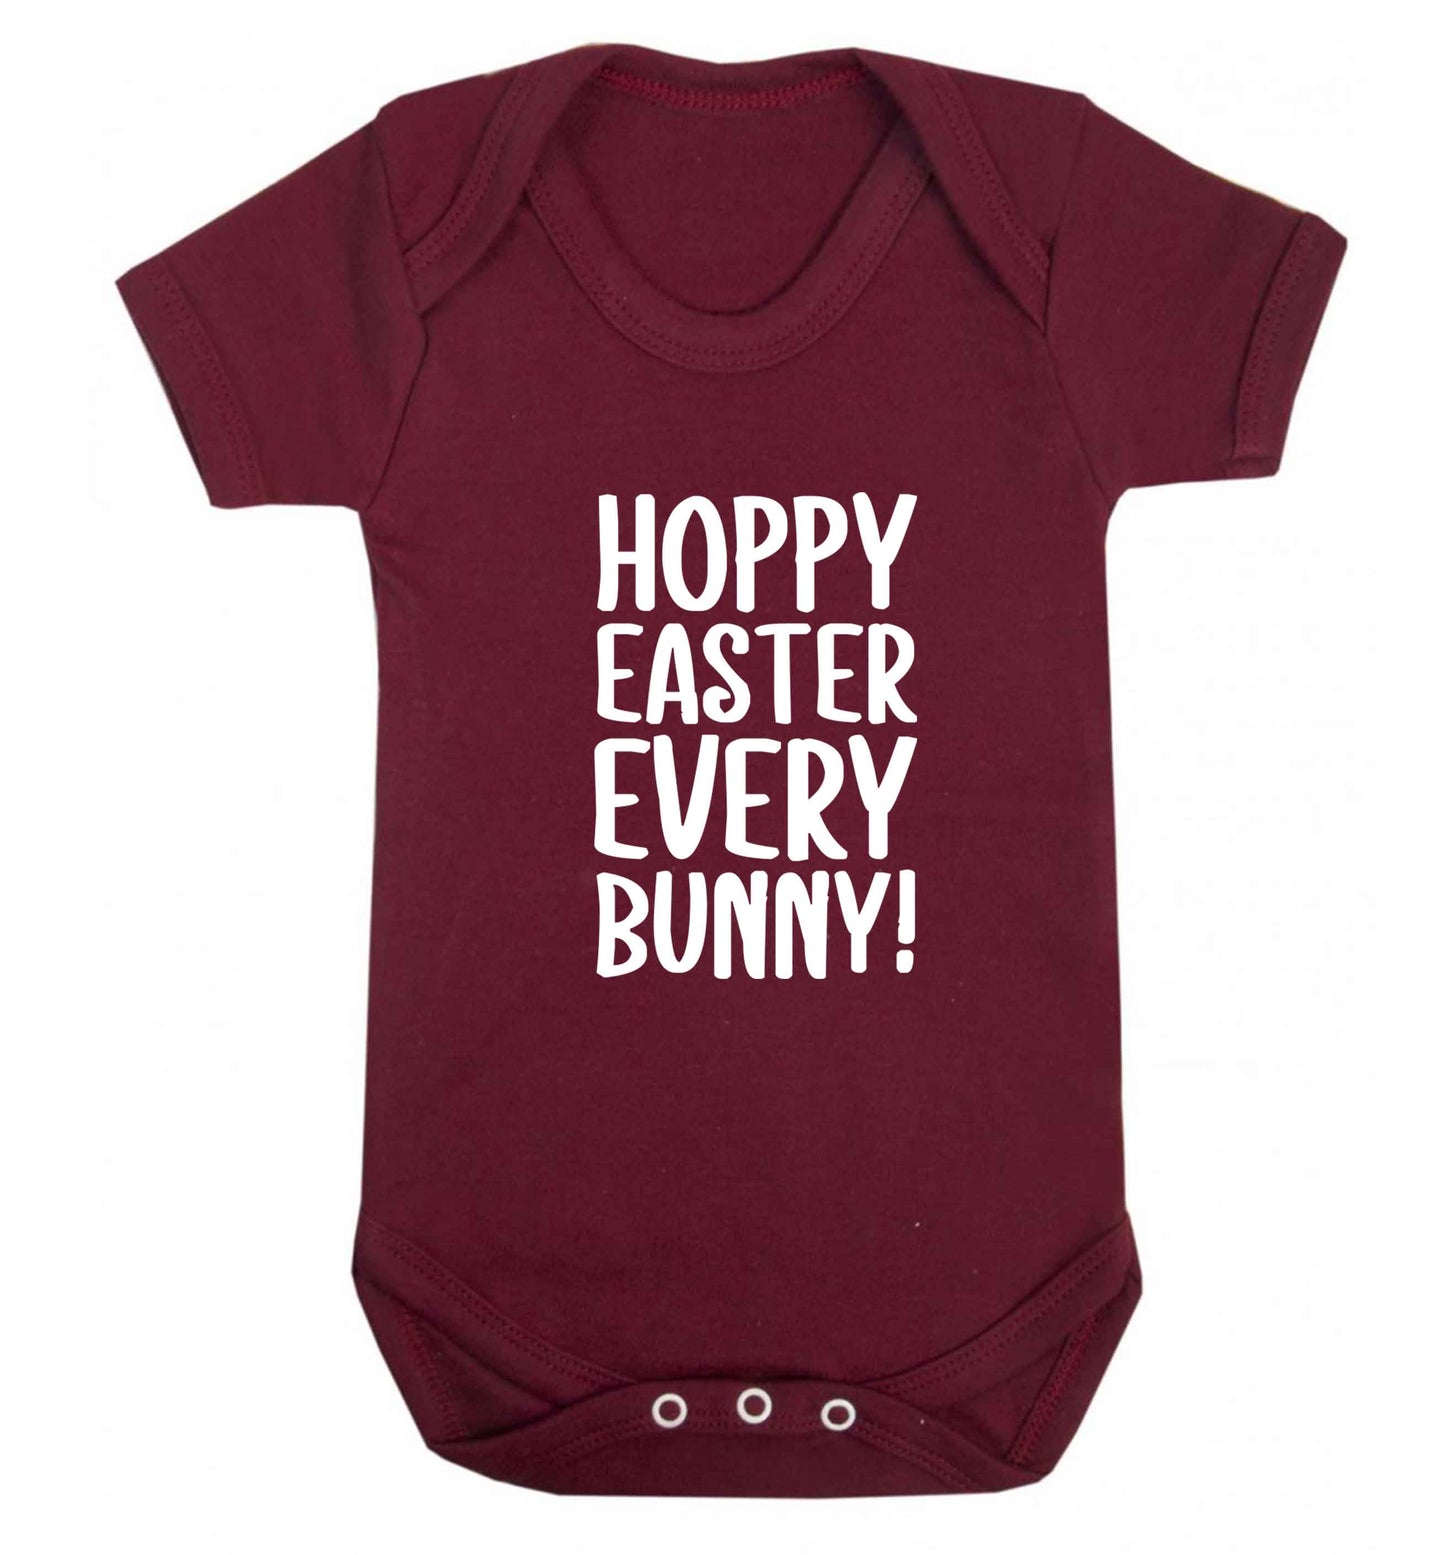 Hoppy Easter every bunny! baby vest maroon 18-24 months